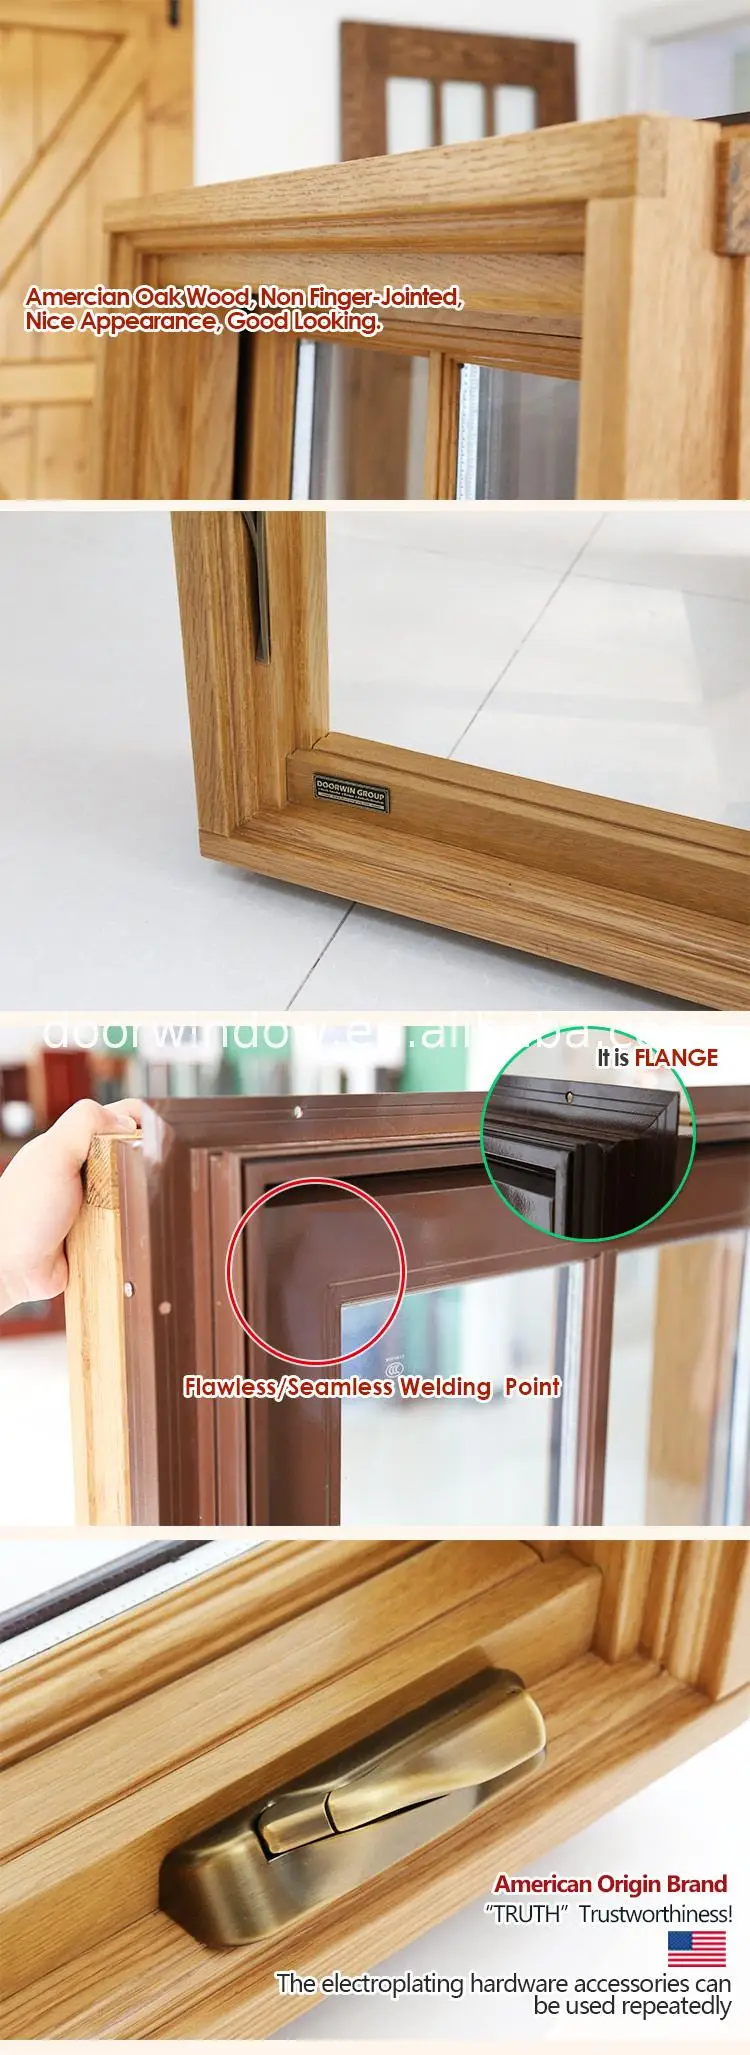 Good quality factory directly upvc vs wooden windows wood aluminium types of used for doors and